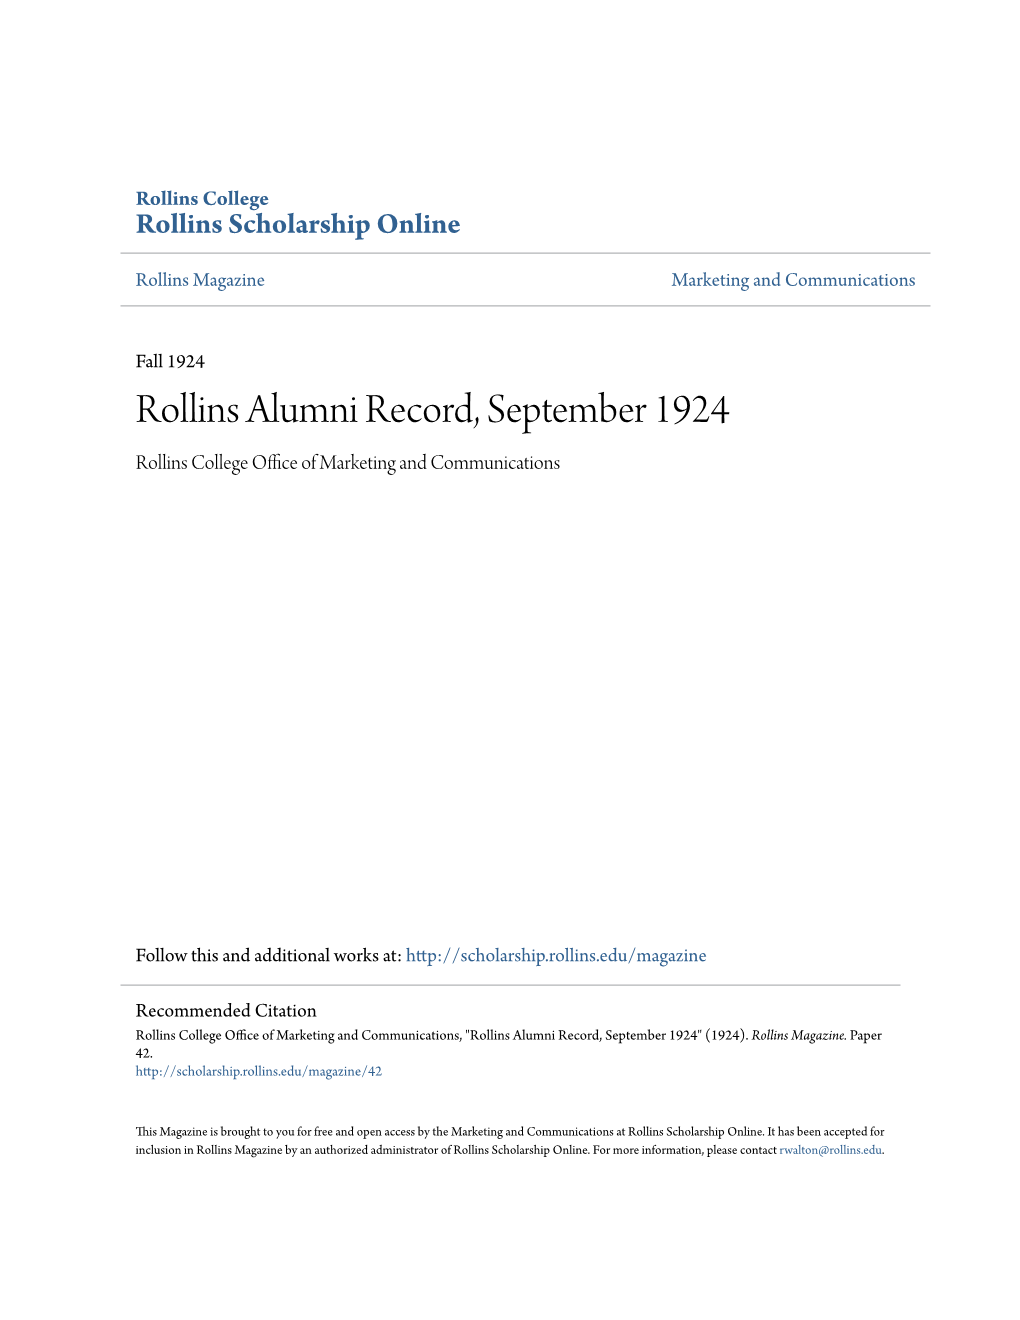 Rollins Alumni Record, September 1924 Rollins College Office Ofa M Rketing and Communications